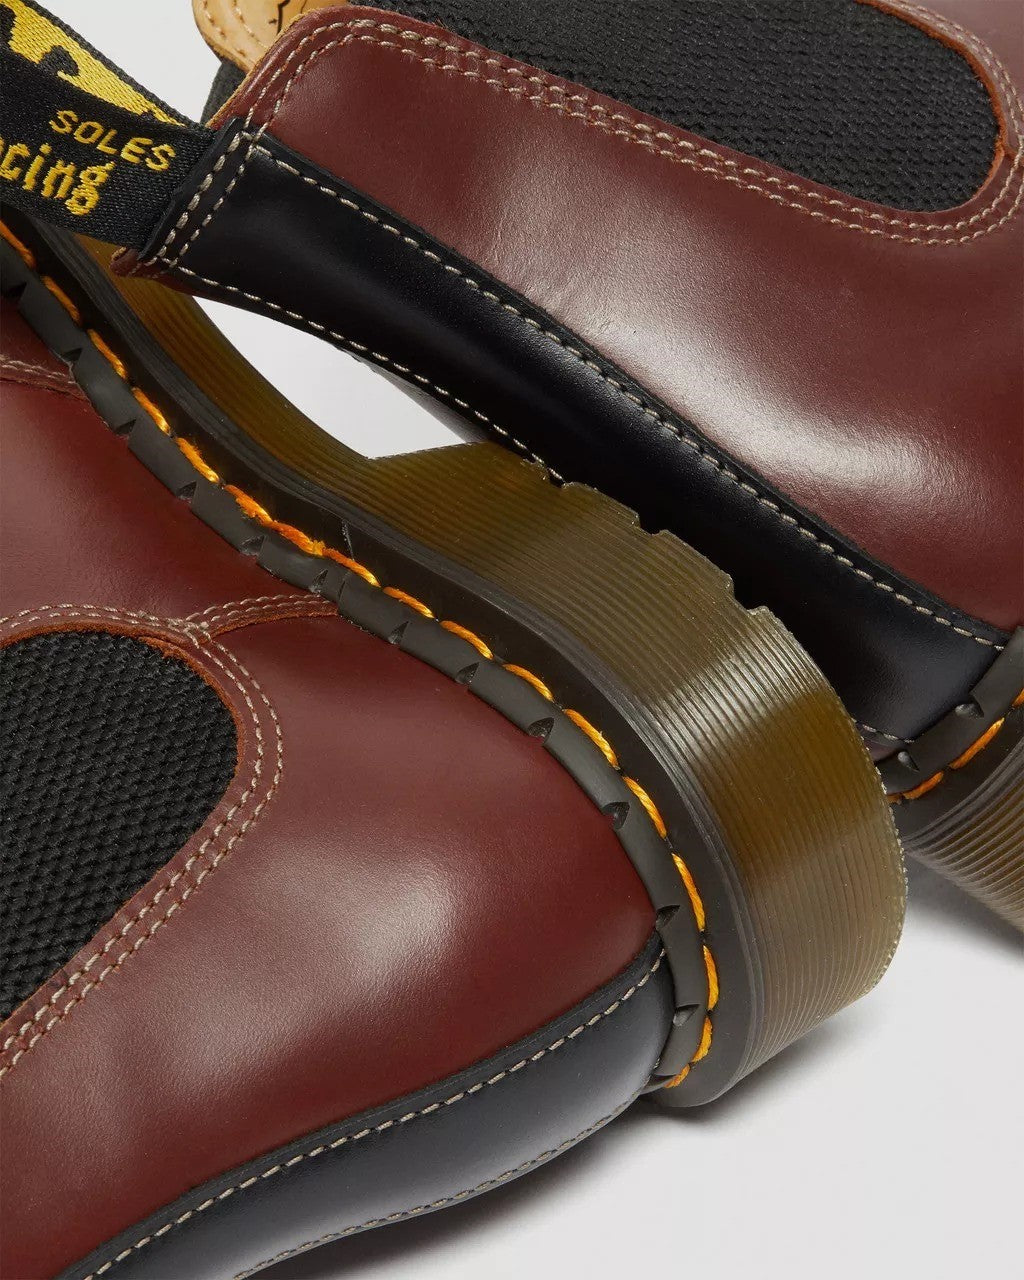 Aniline Leather from Dr Martens